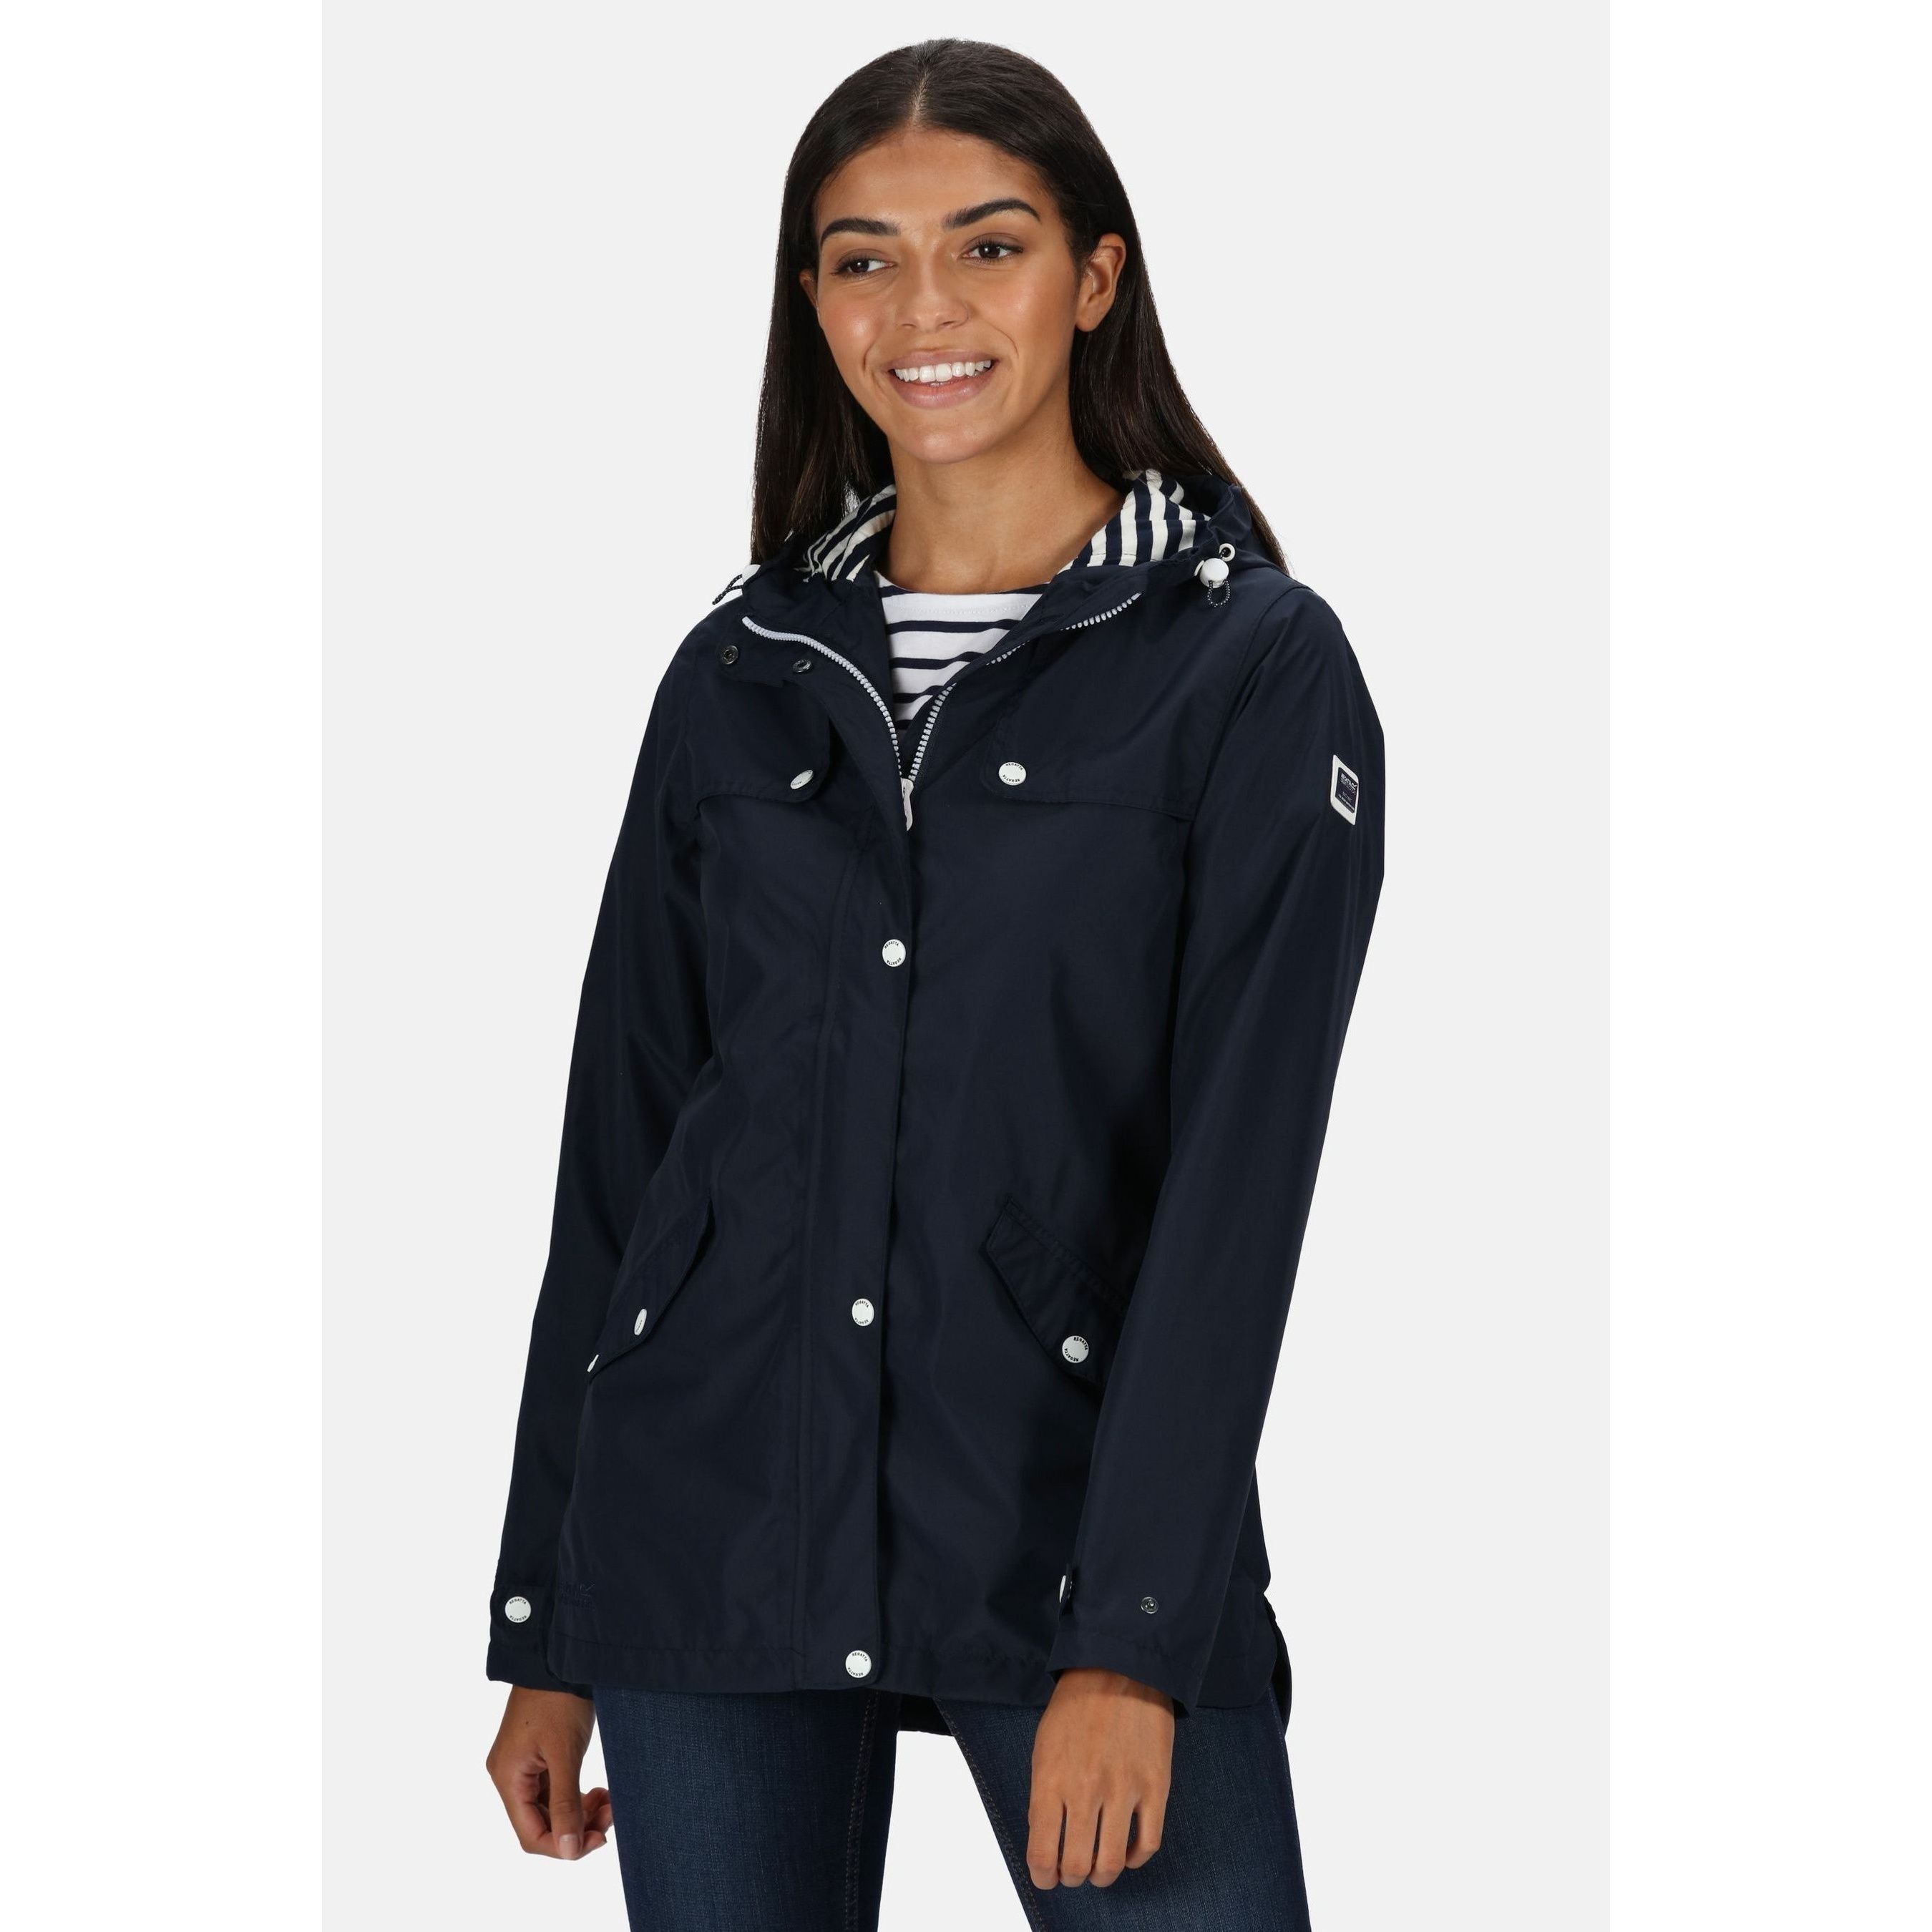 Material: 100% polyester. Breathability rating 5,000g/m2/24hrs. Durable water repellent finish. Taped seams. Part cotton chambray, part polyester taffeta lining. Internal security pocket. Grown on hood with adjusters. Adjustable cuffs. 2 lower pockets with flaps and branded snap fastening.